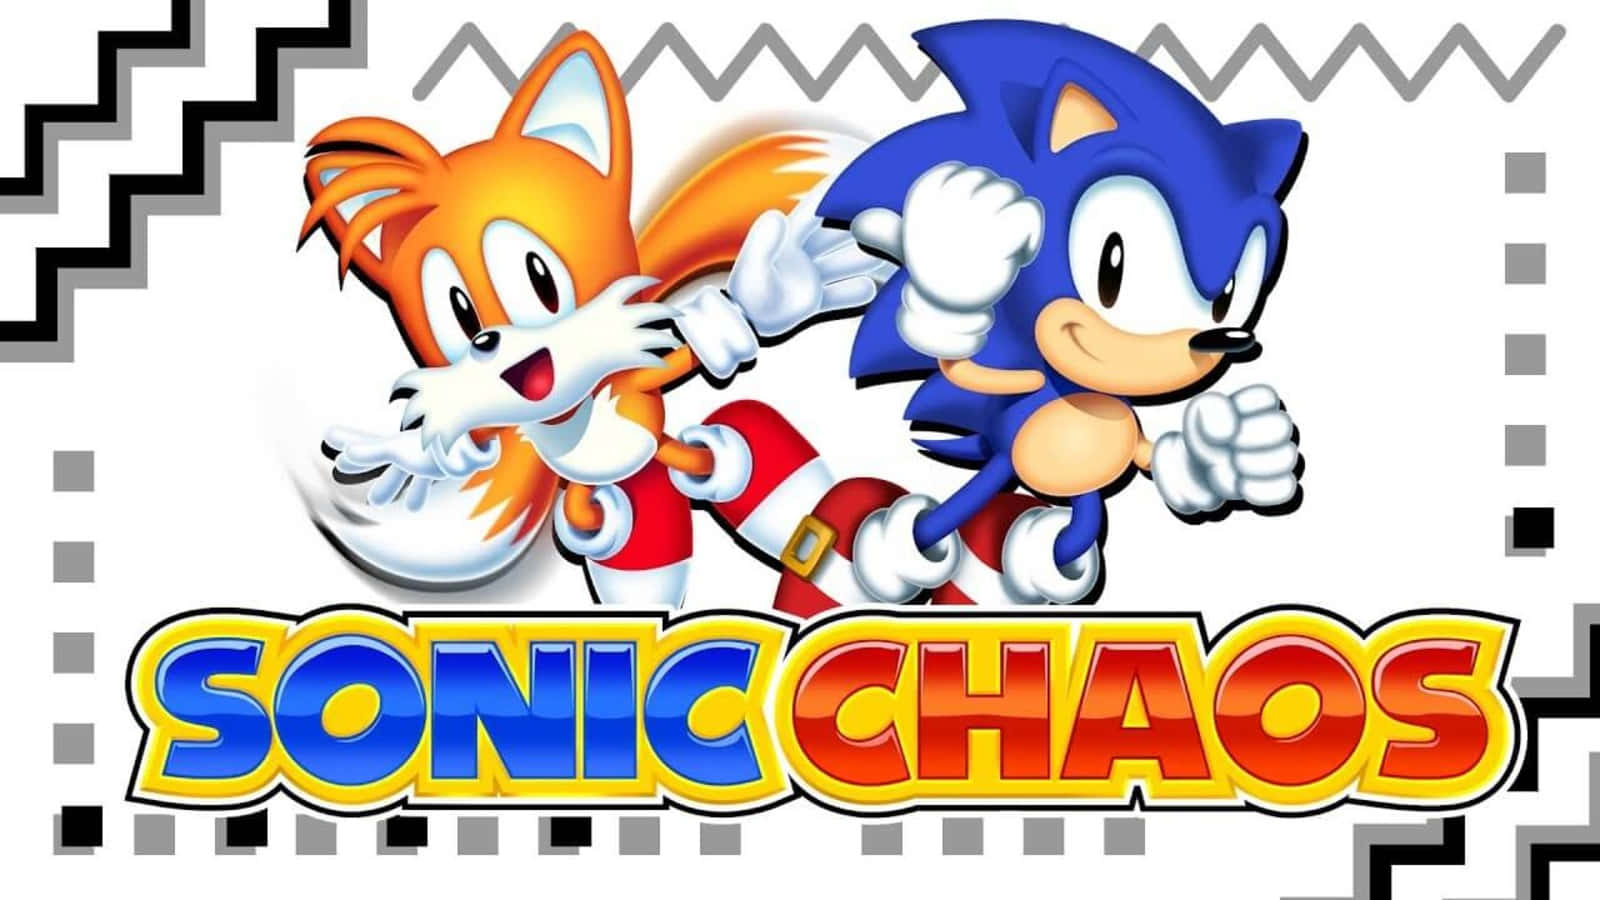 Sonic the Hedgehog in action on Sonic Chaos Game Wallpaper